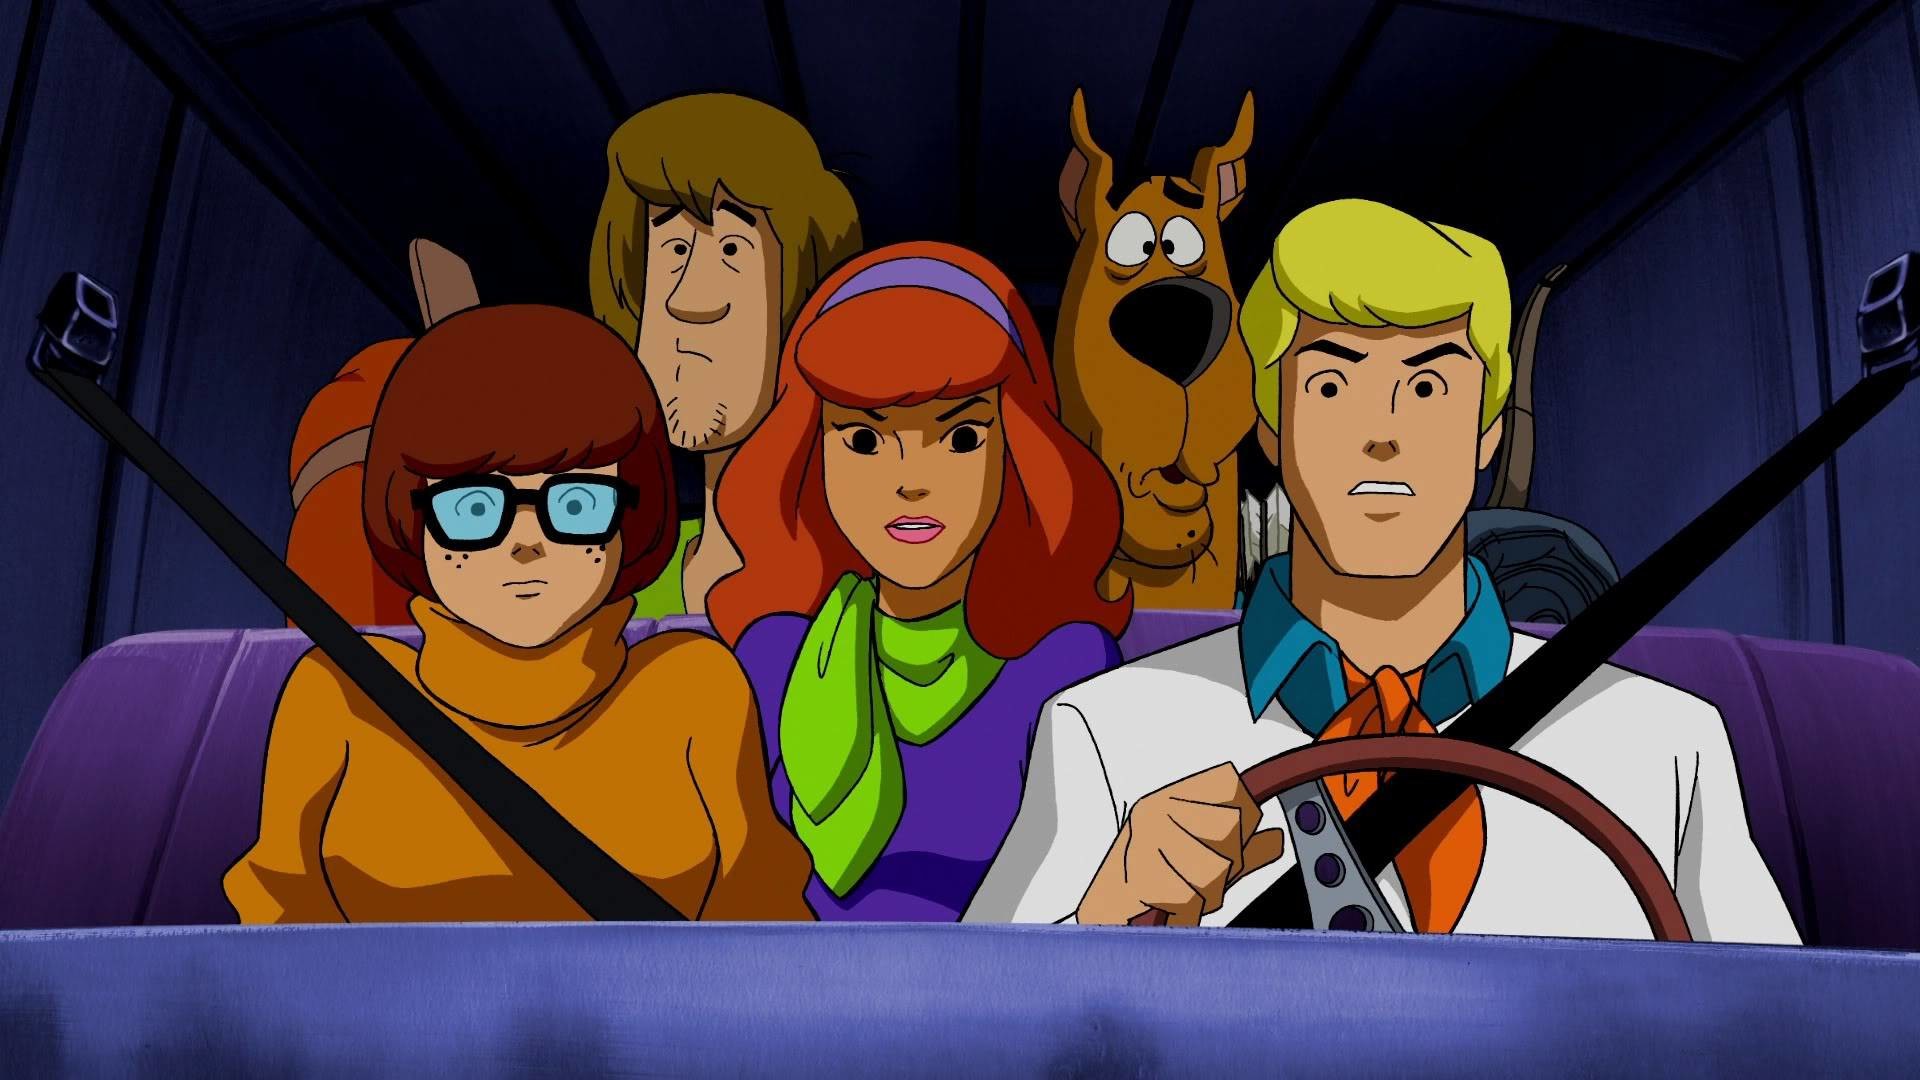 1920x1080 Scooby Doo Wallpaper Free For Windows | Cartoons Images